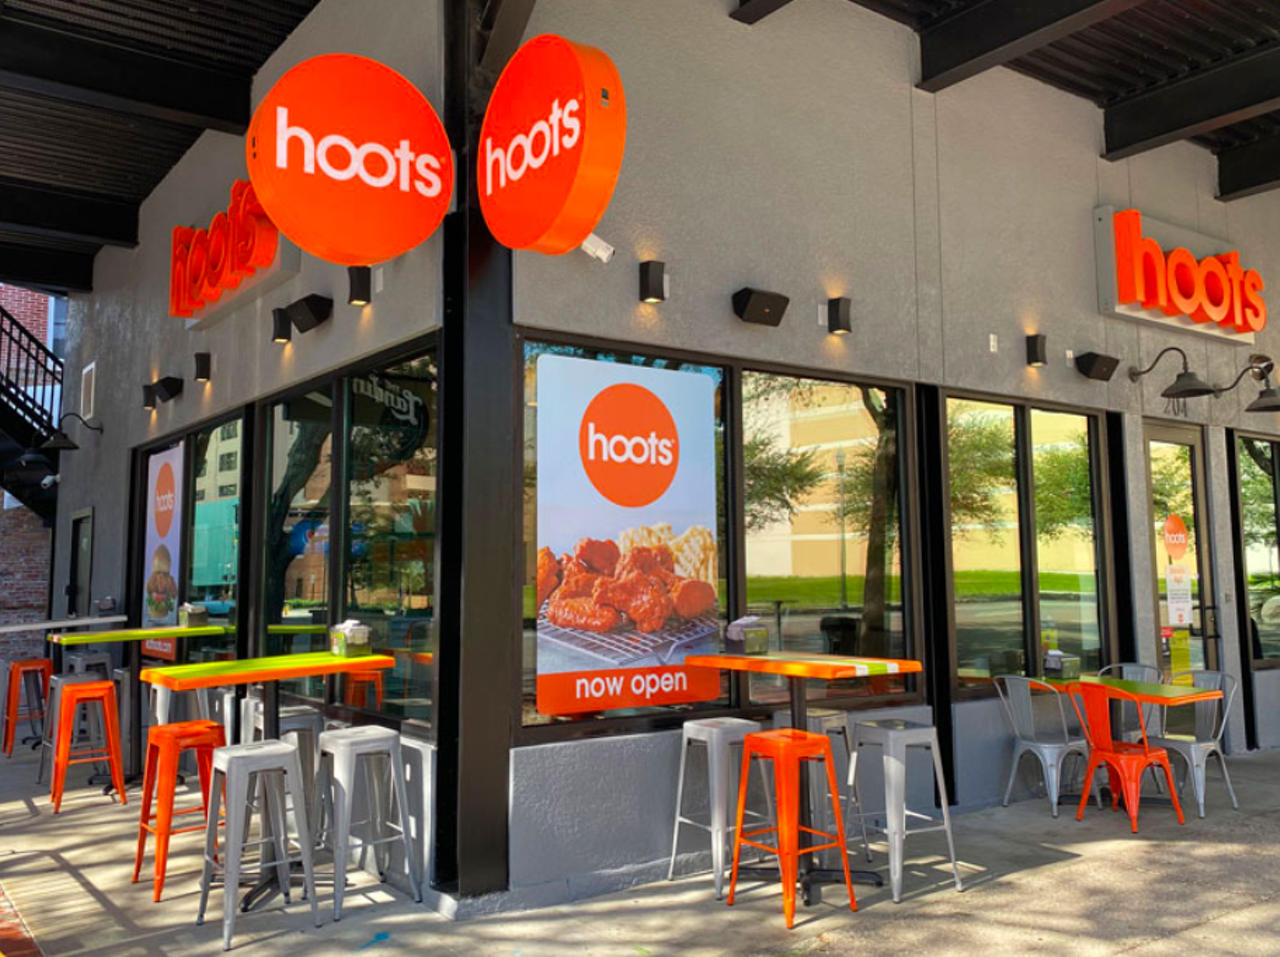 Hoots  
204 1st Ave., St. Petersburg
A new concept from Hooters, Hoots is a fast casual wing spot, where men can be servers too. Specializing in bar foods, wings and 10 signature sauces, the restaurant is the chain&#146;s first location in Florida. 
Photo via Hoots/Website